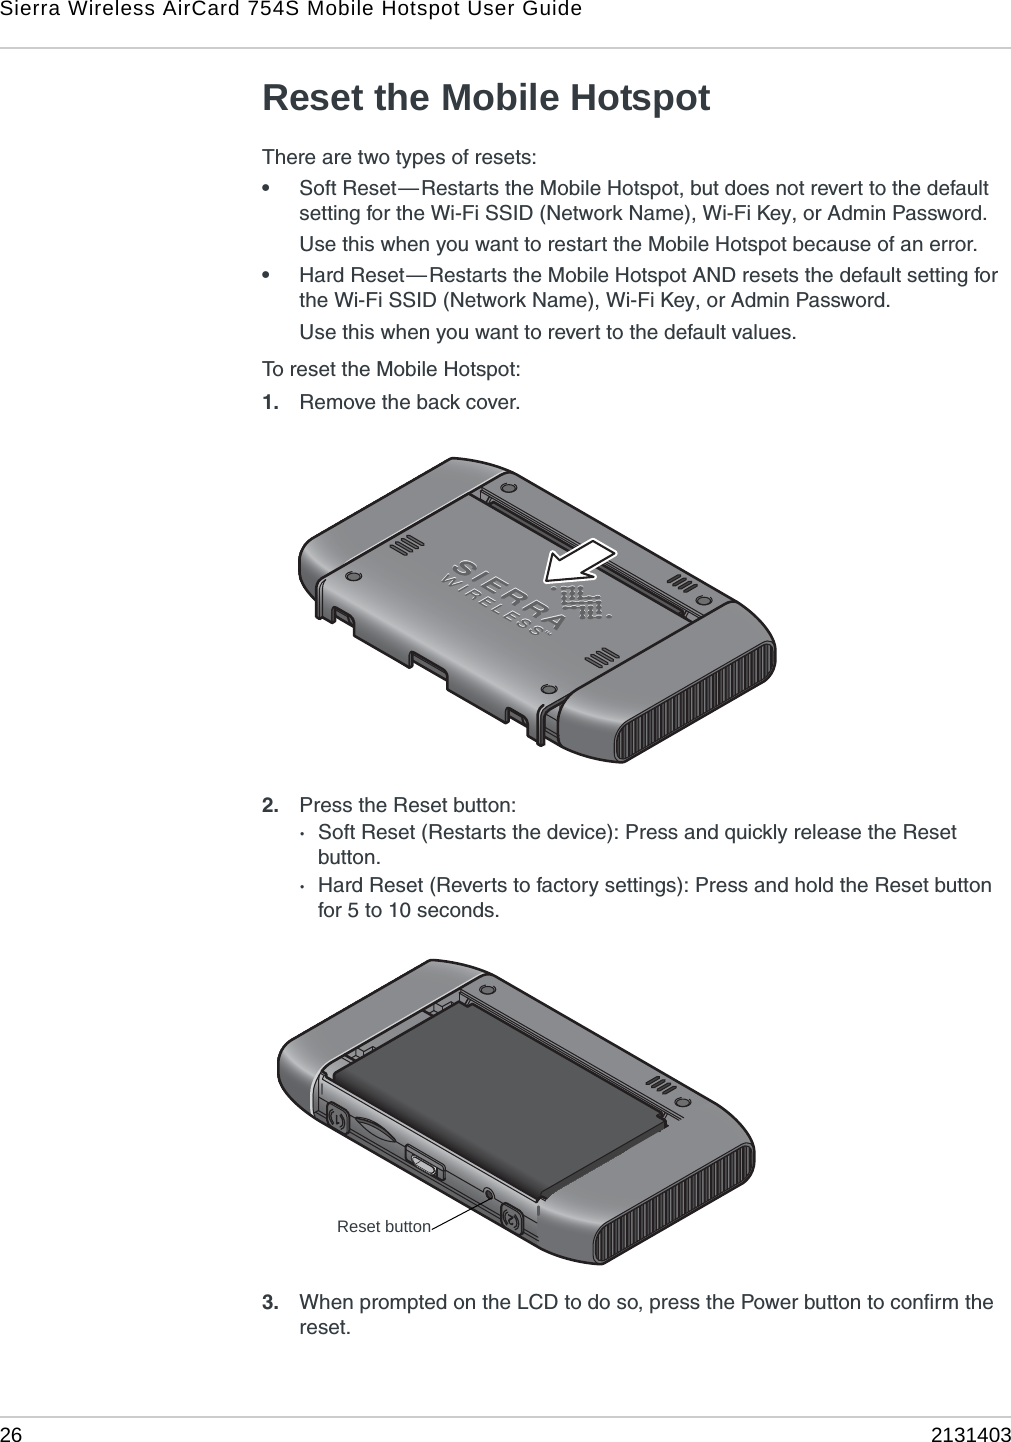 Sierra Wireless AirCard 754S Mobile Hotspot User Guide26 2131403Reset the Mobile HotspotThere are two types of resets:•Soft Reset—Restarts the Mobile Hotspot, but does not revert to the default setting for the Wi-Fi SSID (Network Name), Wi-Fi Key, or Admin Password. Use this when you want to restart the Mobile Hotspot because of an error.•Hard Reset—Restarts the Mobile Hotspot AND resets the default setting for the Wi-Fi SSID (Network Name), Wi-Fi Key, or Admin Password.Use this when you want to revert to the default values. To reset the Mobile Hotspot:1. Remove the back cover.2. Press the Reset button:·Soft Reset (Restarts the device): Press and quickly release the Reset button.·Hard Reset (Reverts to factory settings): Press and hold the Reset button for 5 to 10 seconds.3. When prompted on the LCD to do so, press the Power button to confirm the reset.Reset button